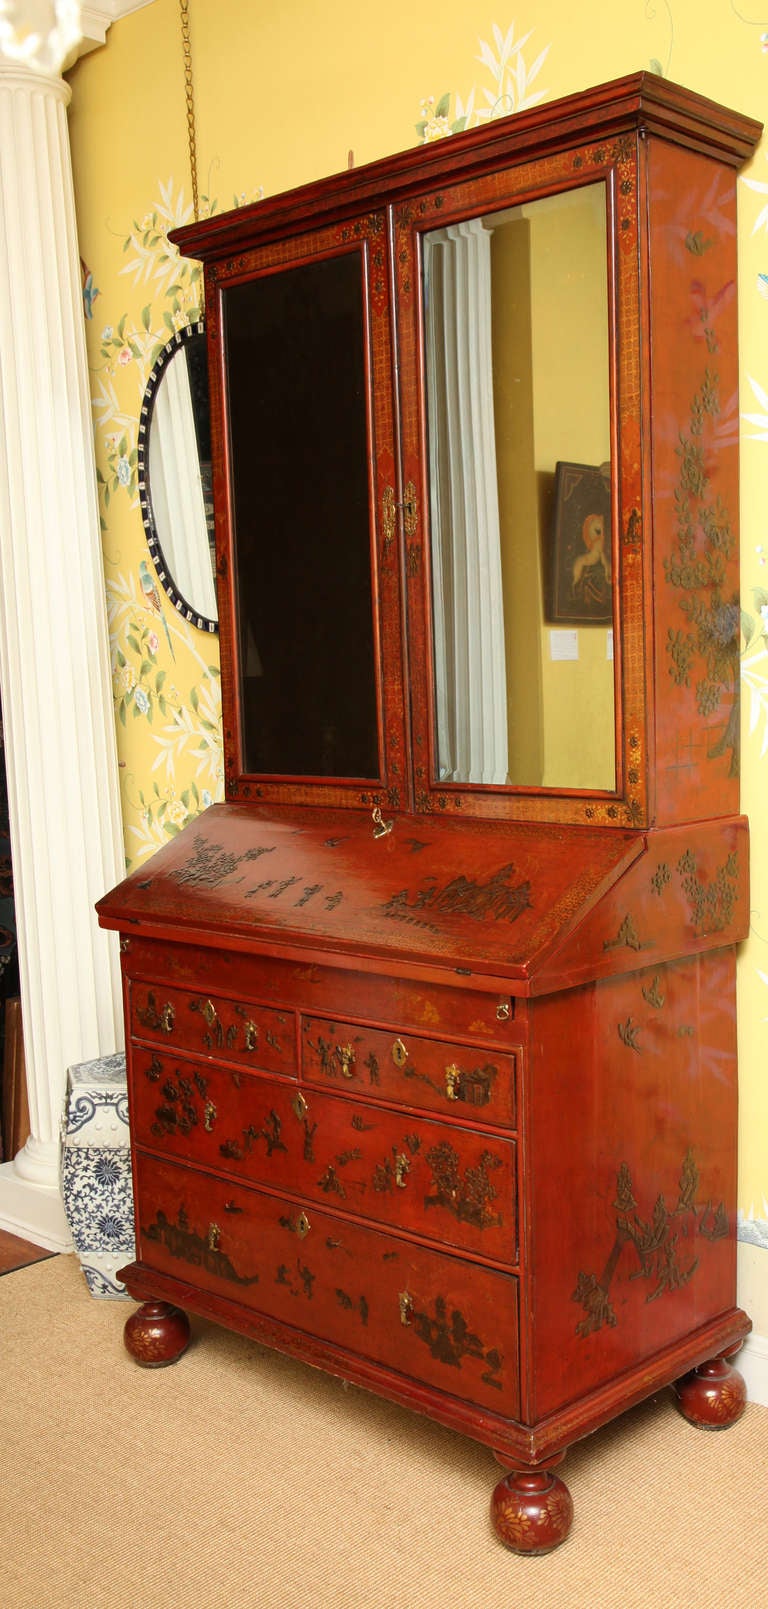 British William & Mary Red and Polychrome Japanned Bureau Bookcase, English, circa 1690 For Sale